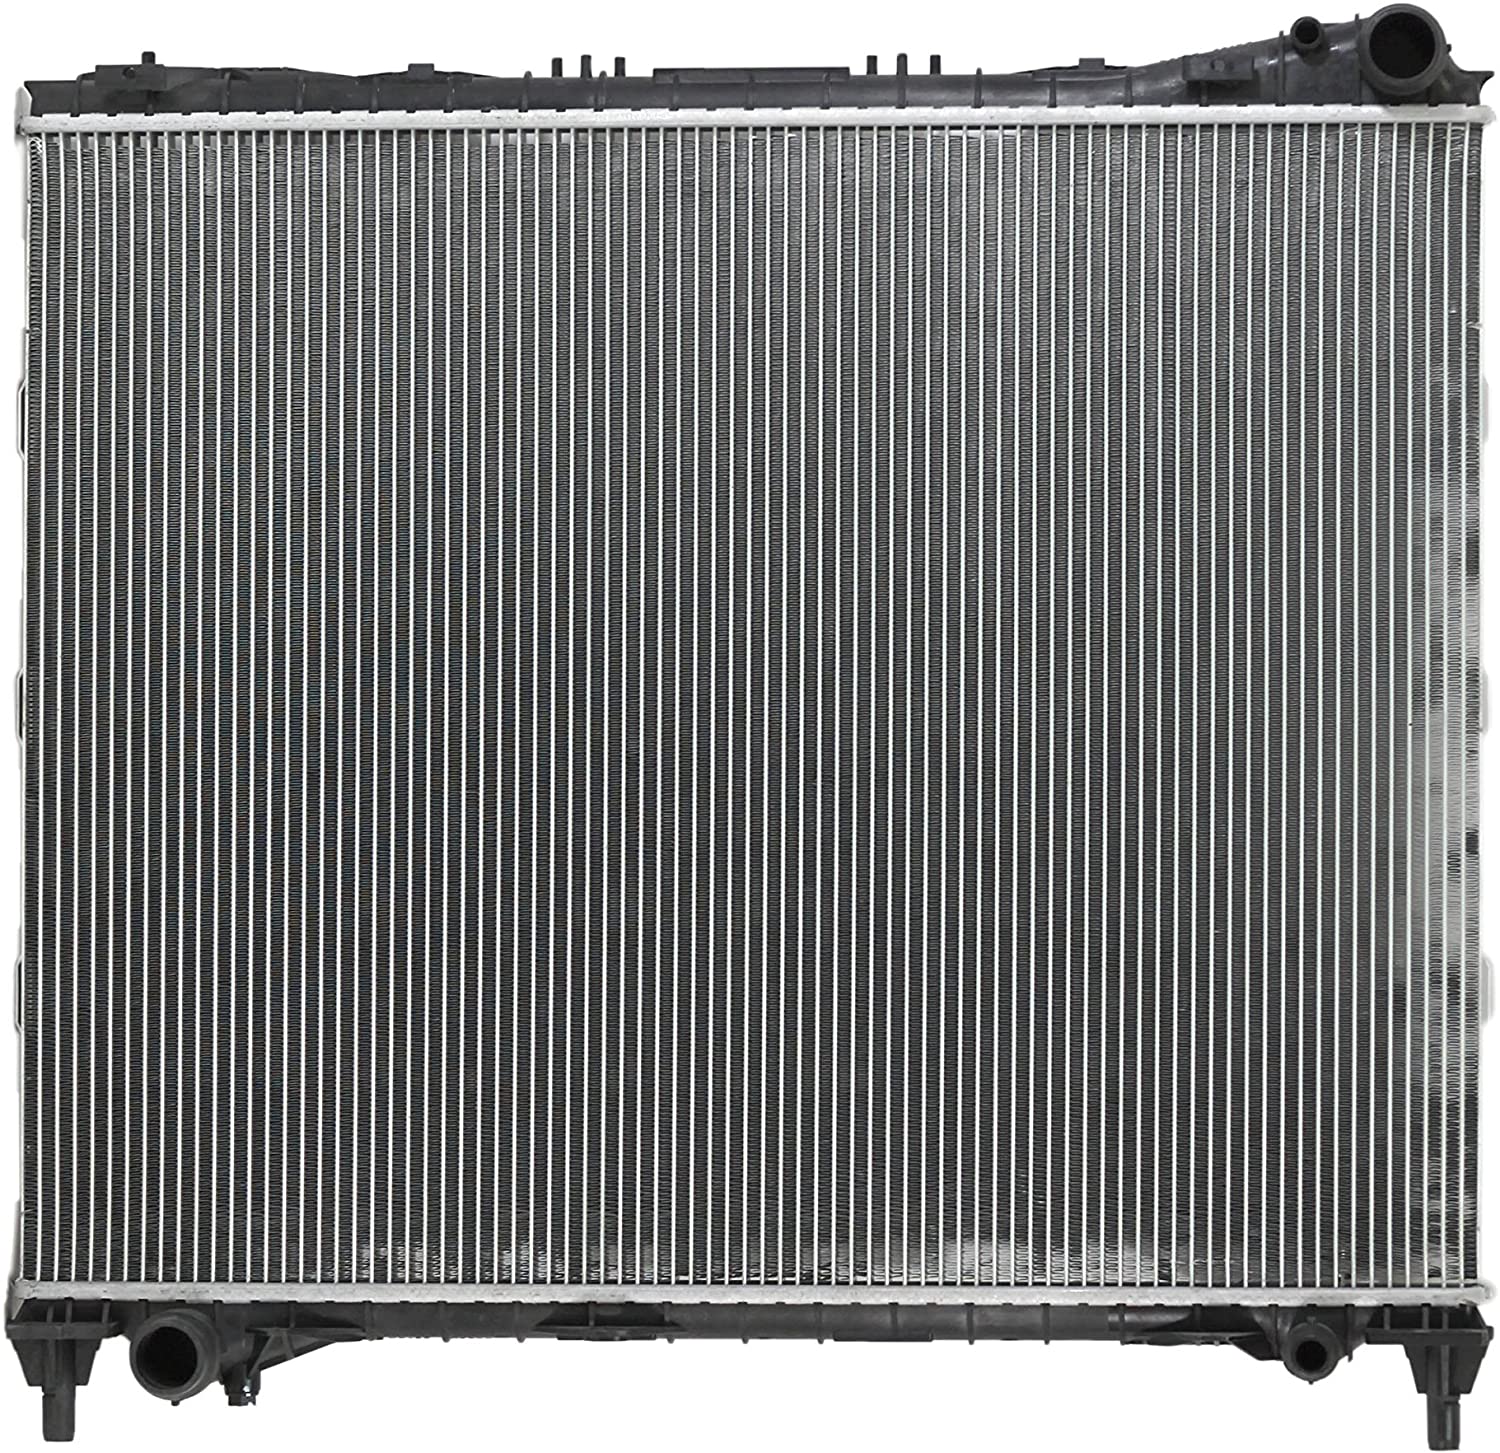 Radiator - Pacific Best Inc Fit/For 13433 13-17 Land Rover Range Rover Gas 5.0/5.0L Supercharged 14-16 Gas 14-17 Sport-Gas Plastic Tank Aluminum Core